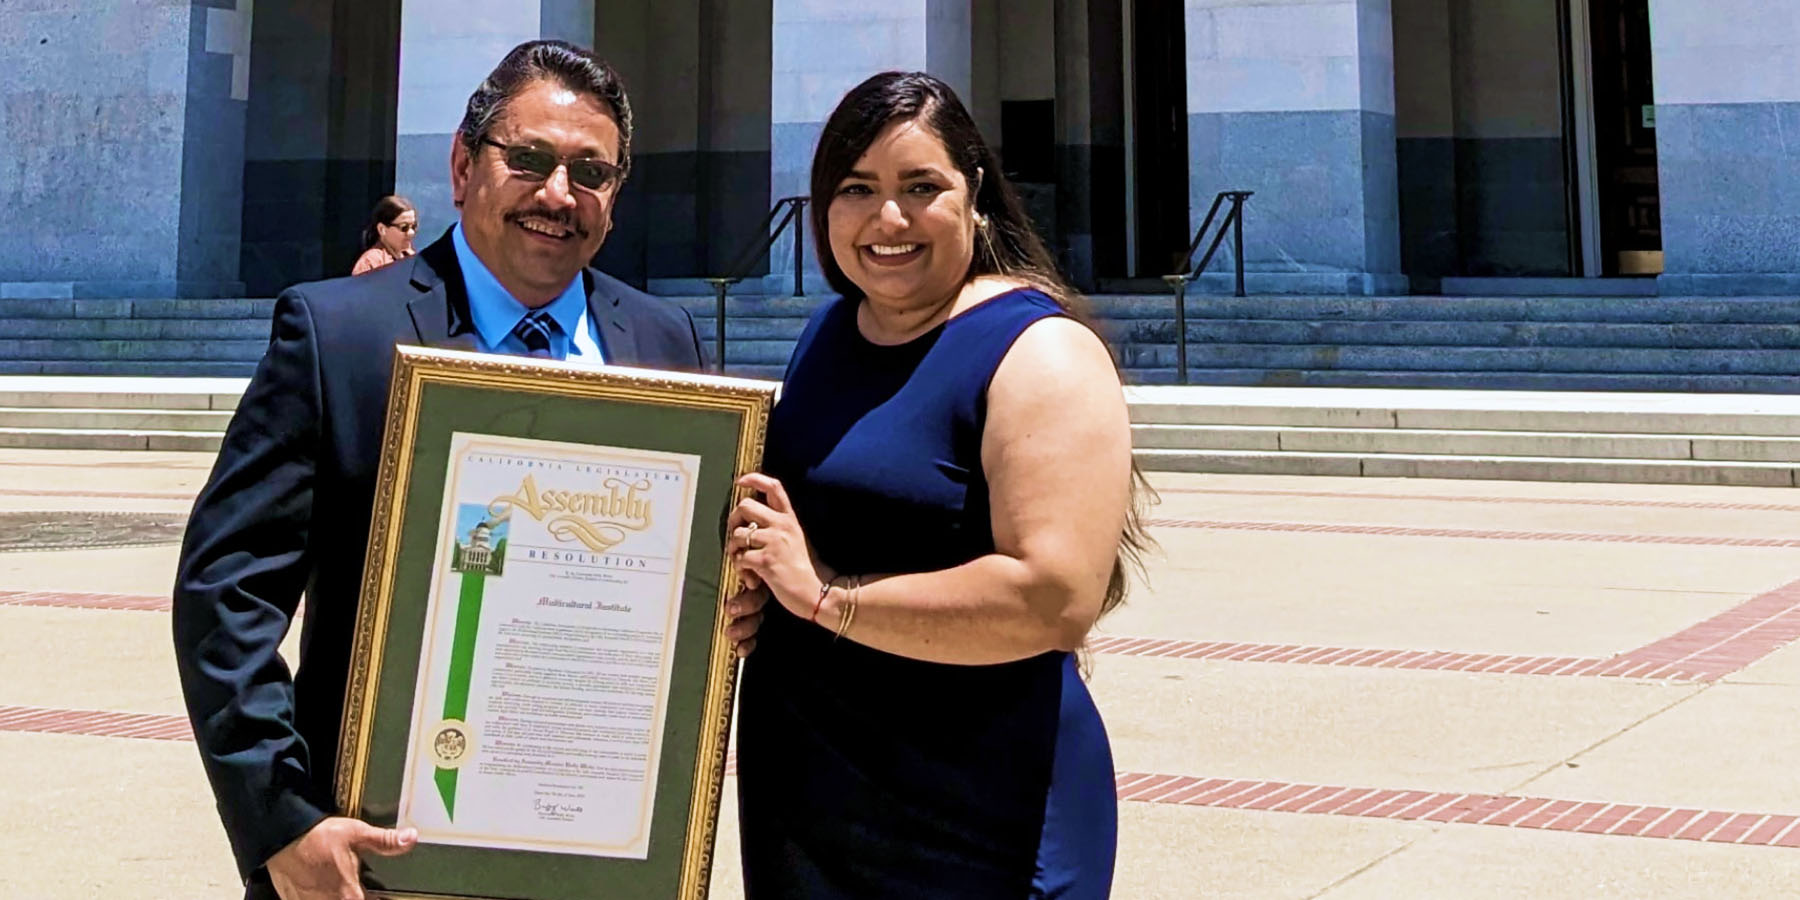 Mirna Cervantes smiles while standing beside a man holding a large framed declaration.